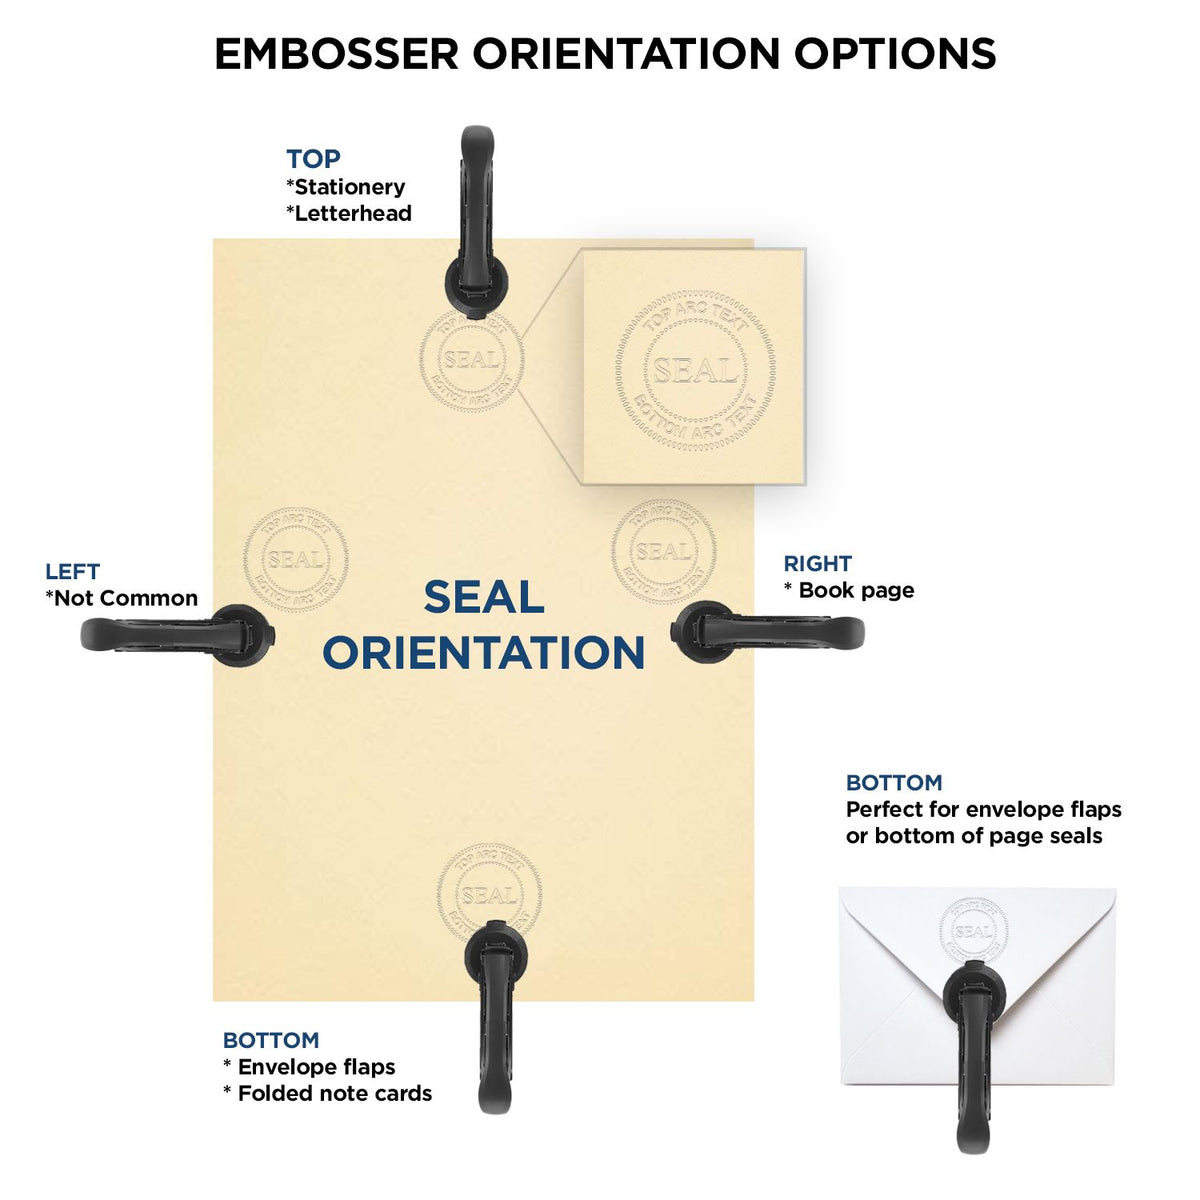 An infographic for the Handheld Maryland Professional Engineer Embosser showing embosser orientation, this is showing examples of a top, bottom, right and left insert.